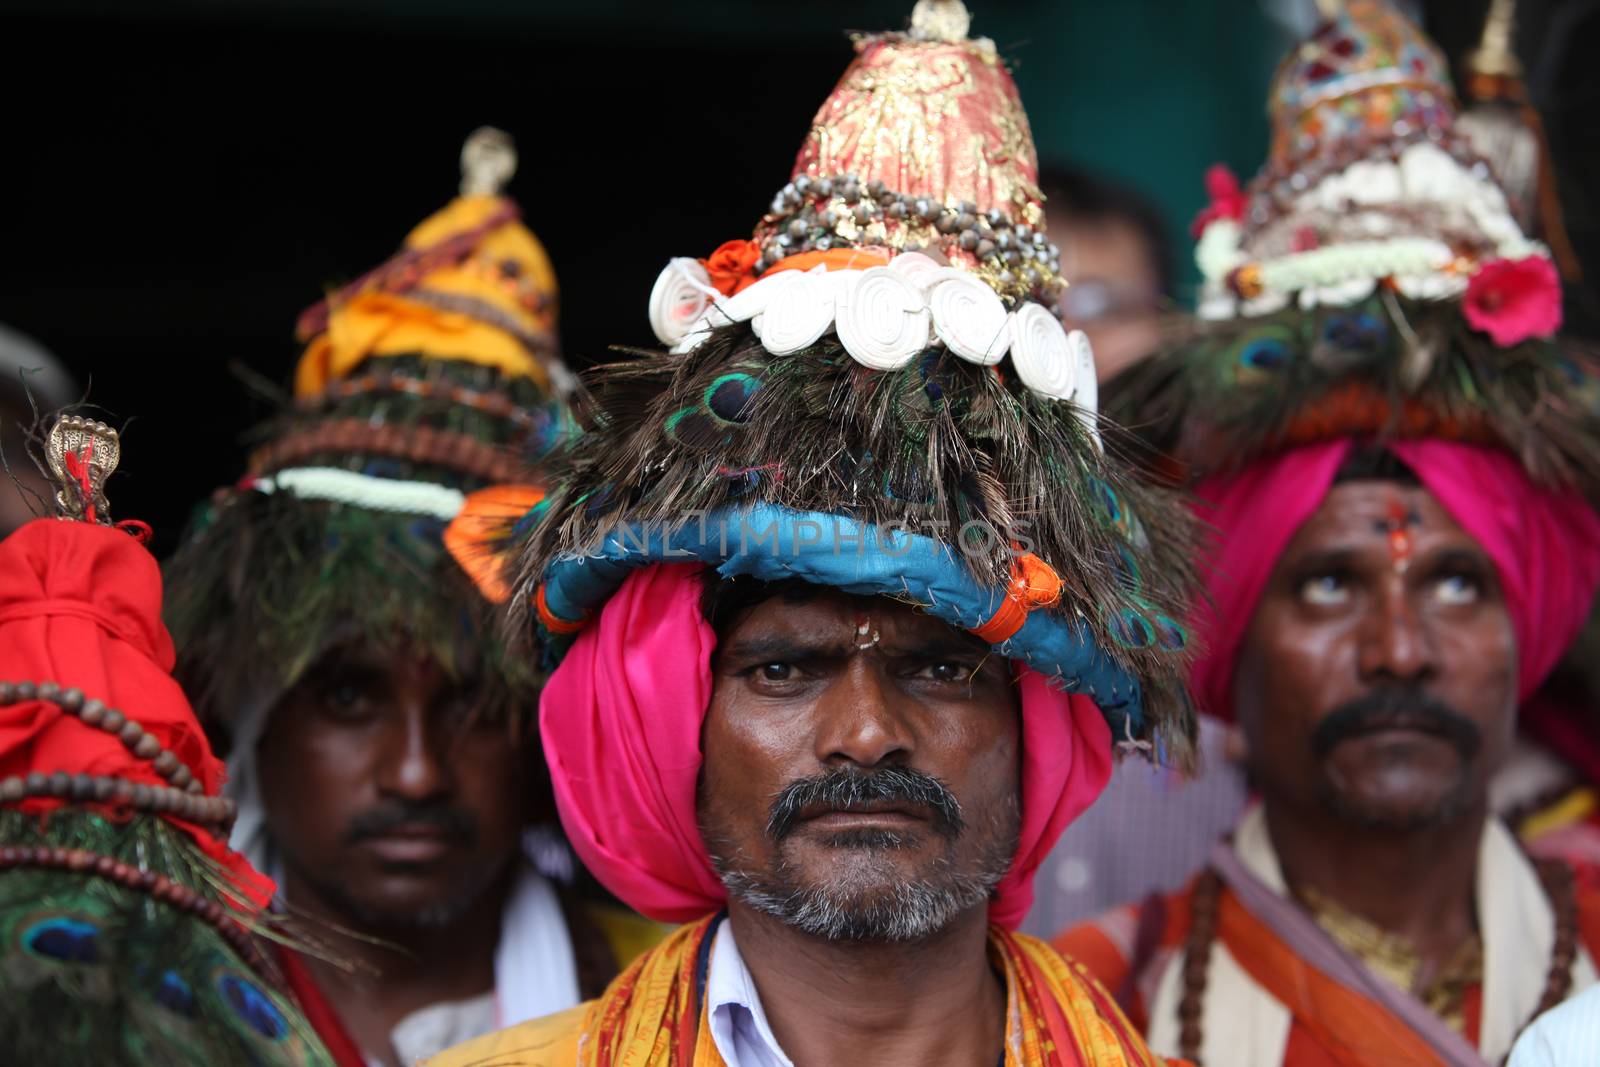 Pune, India - July 11, 2015: A group of Vasudev pilgrims who are devotees of Lord Vishnu and wear a conical hat with peacock feathers. Vasudev has been a traditional since many years in Maharashtra. THese pilgrims go around singing praises of Lord Vishnu.